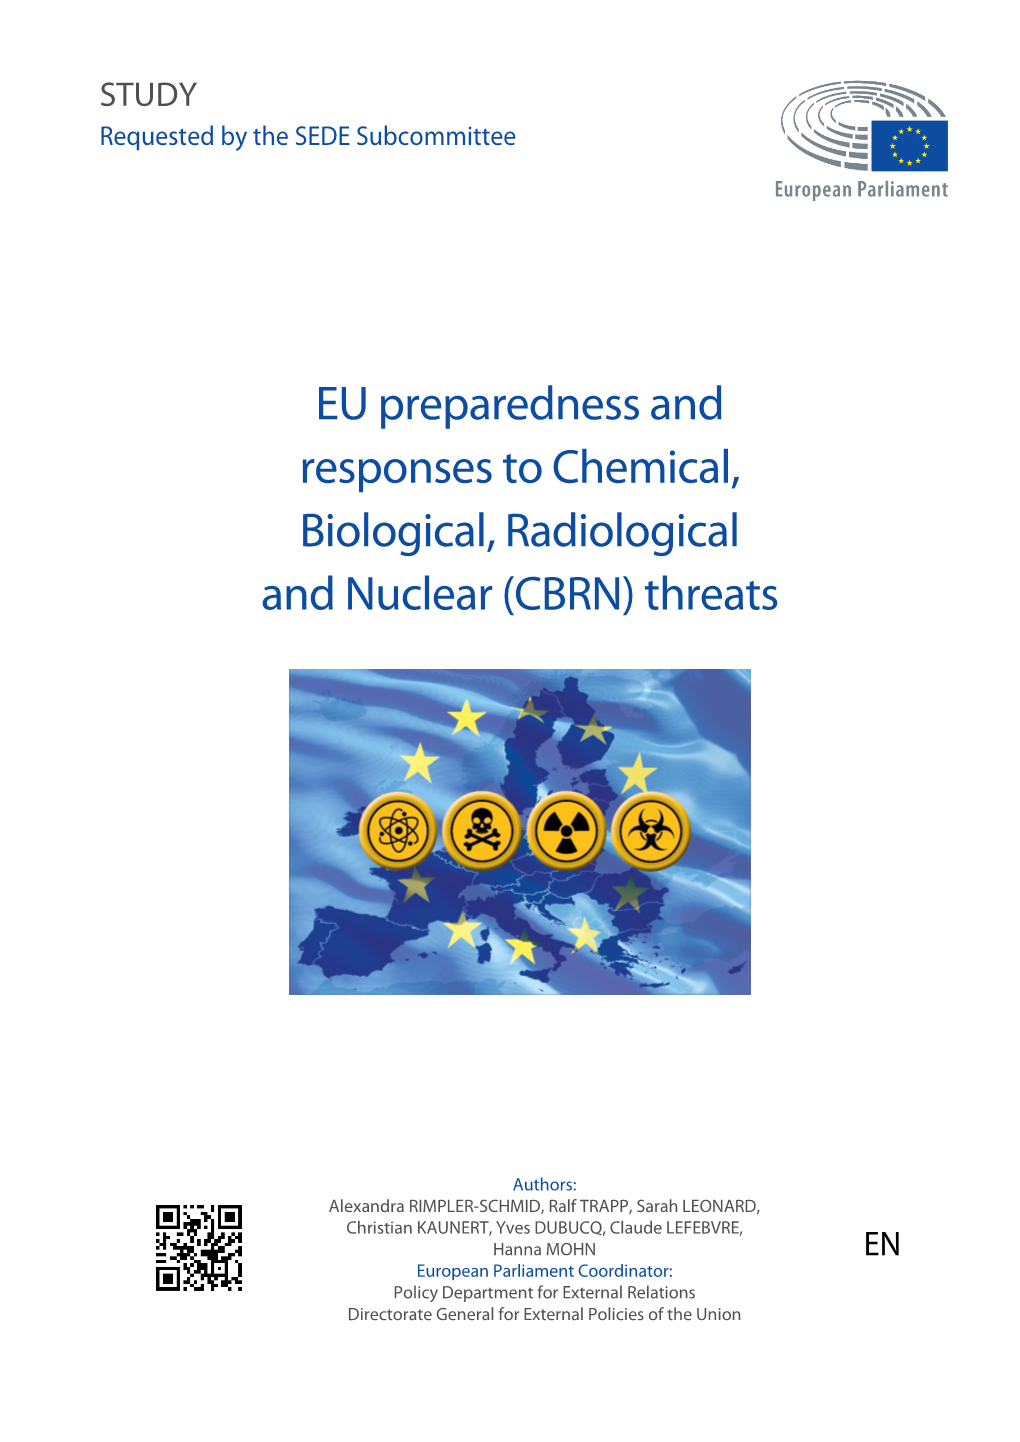 EU Preparedness and Responses to Chemical, Biological, Radiological and Nuclear (CBRN) Threats